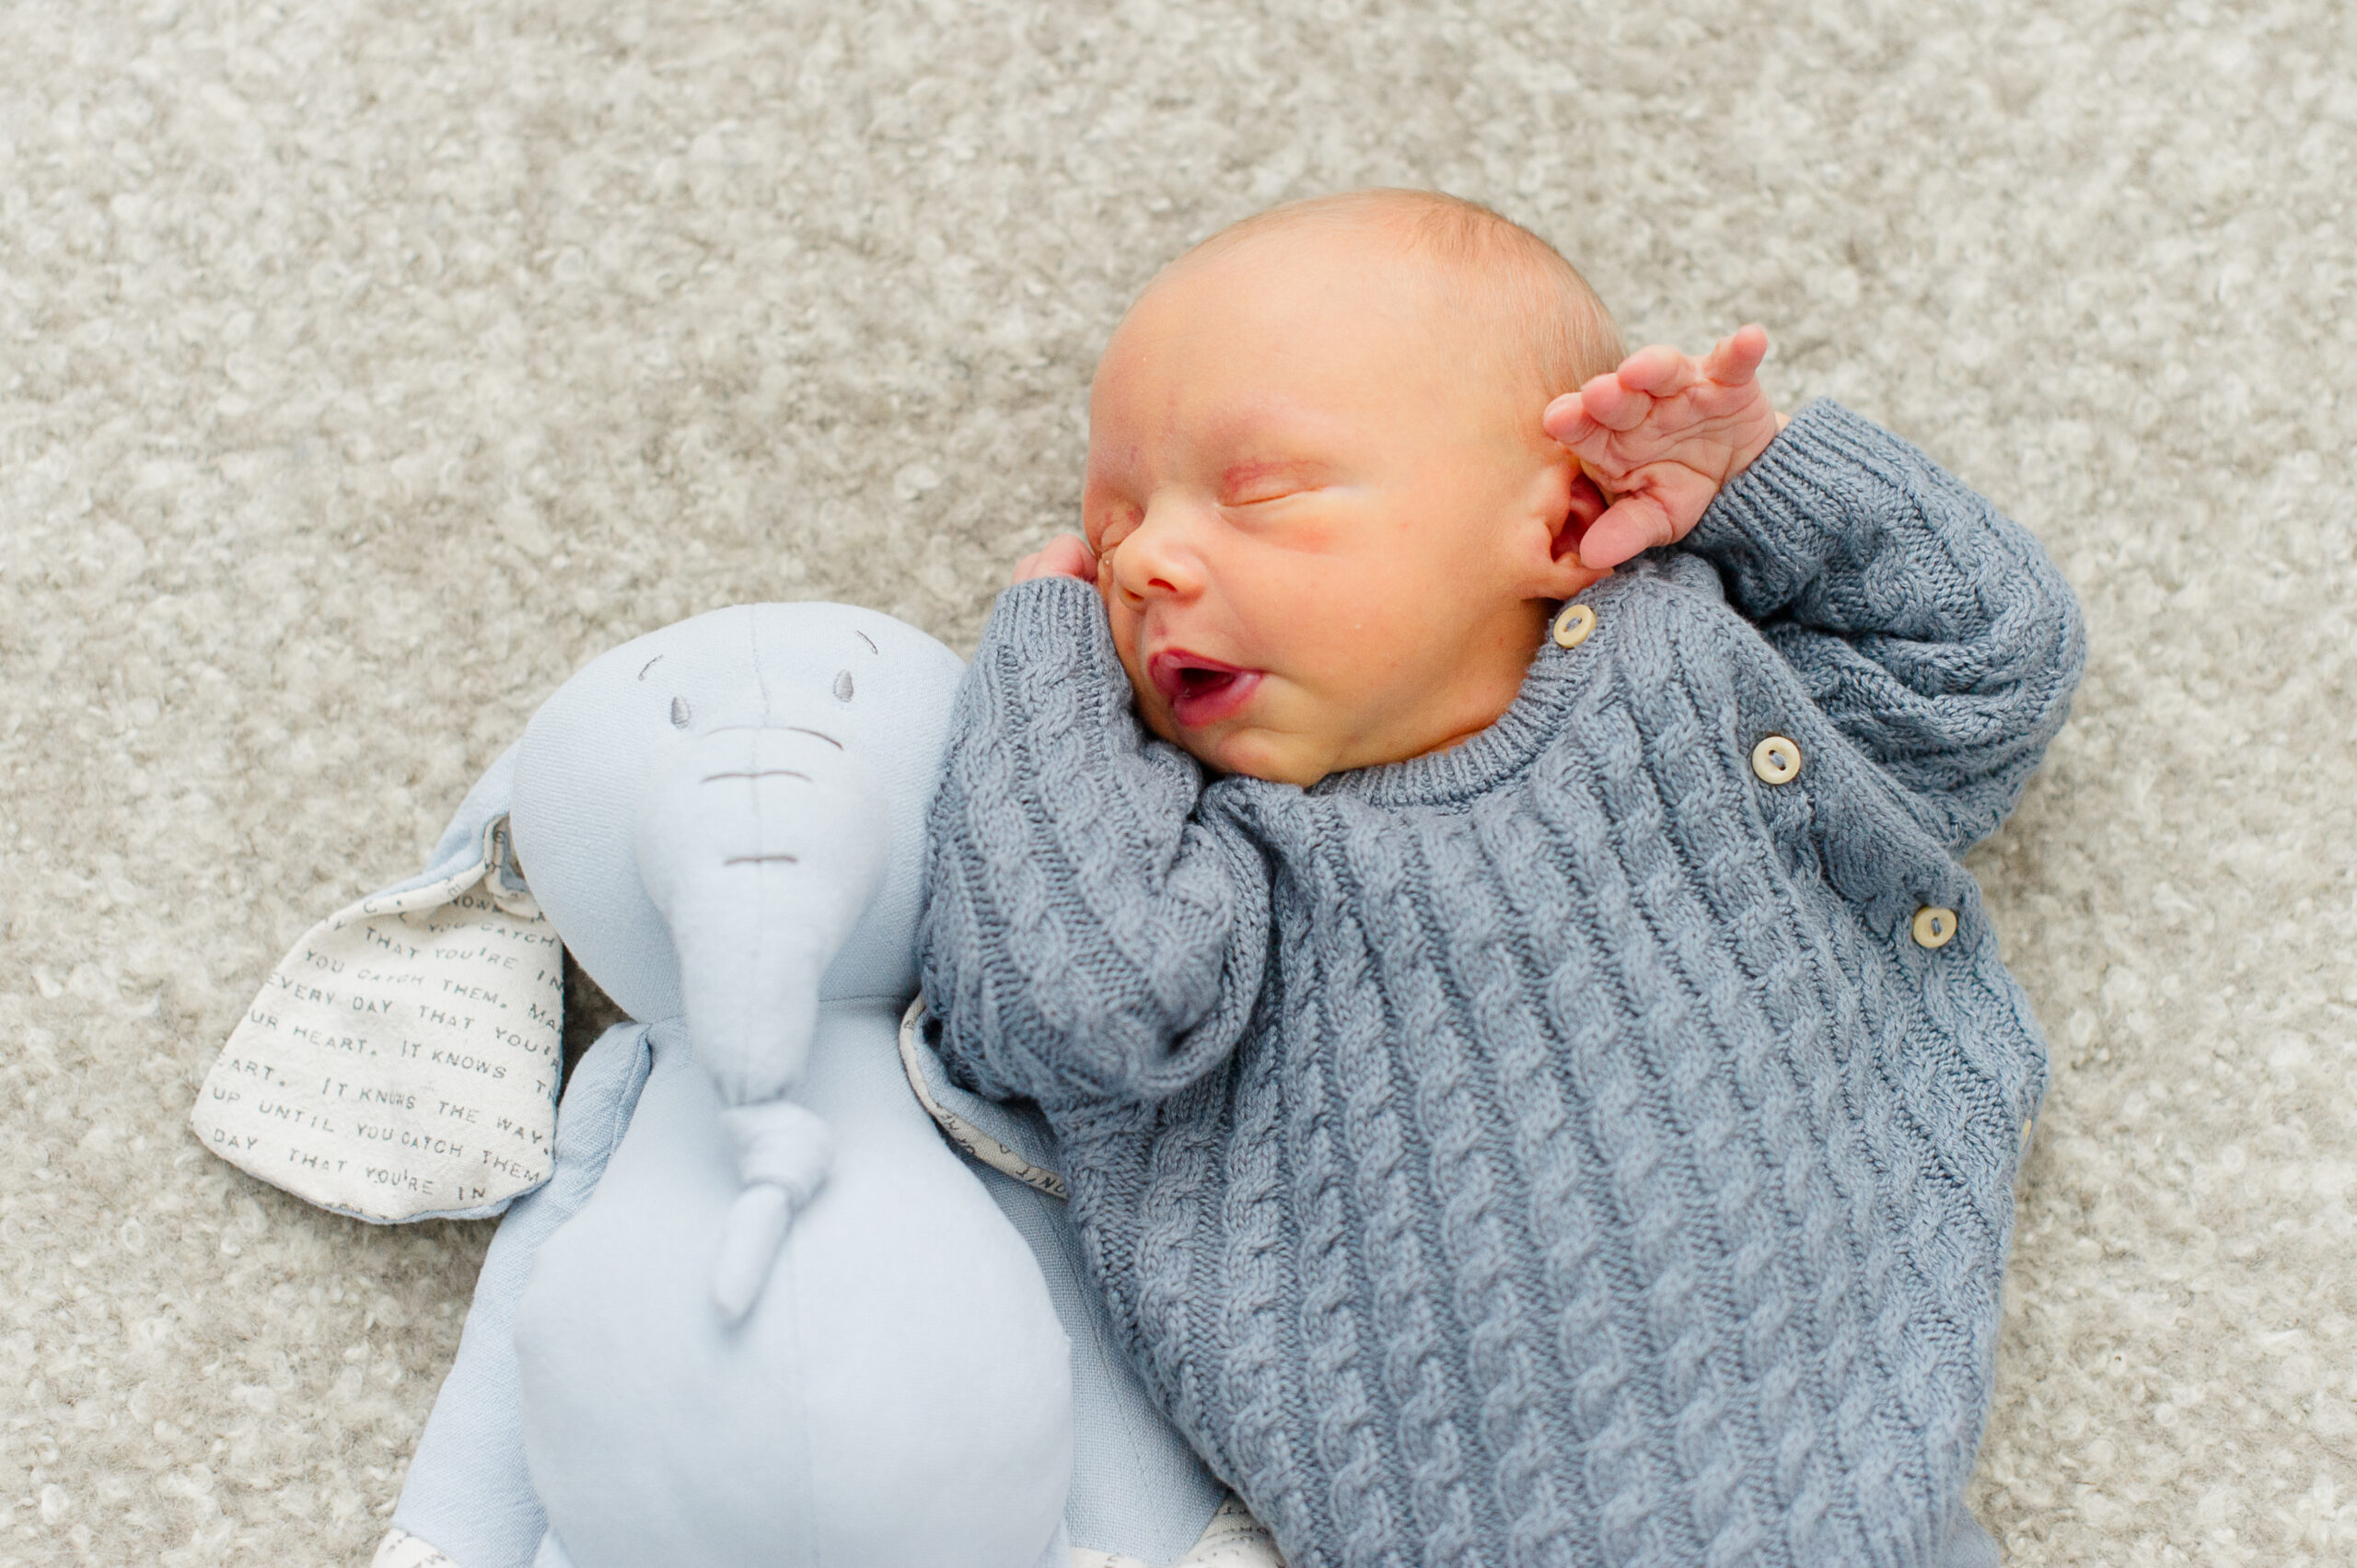 Newborn baby lays next to his blue stuffed elephant and sleeps with his hands beside his face in the cutest blue sweater Orlando midwives